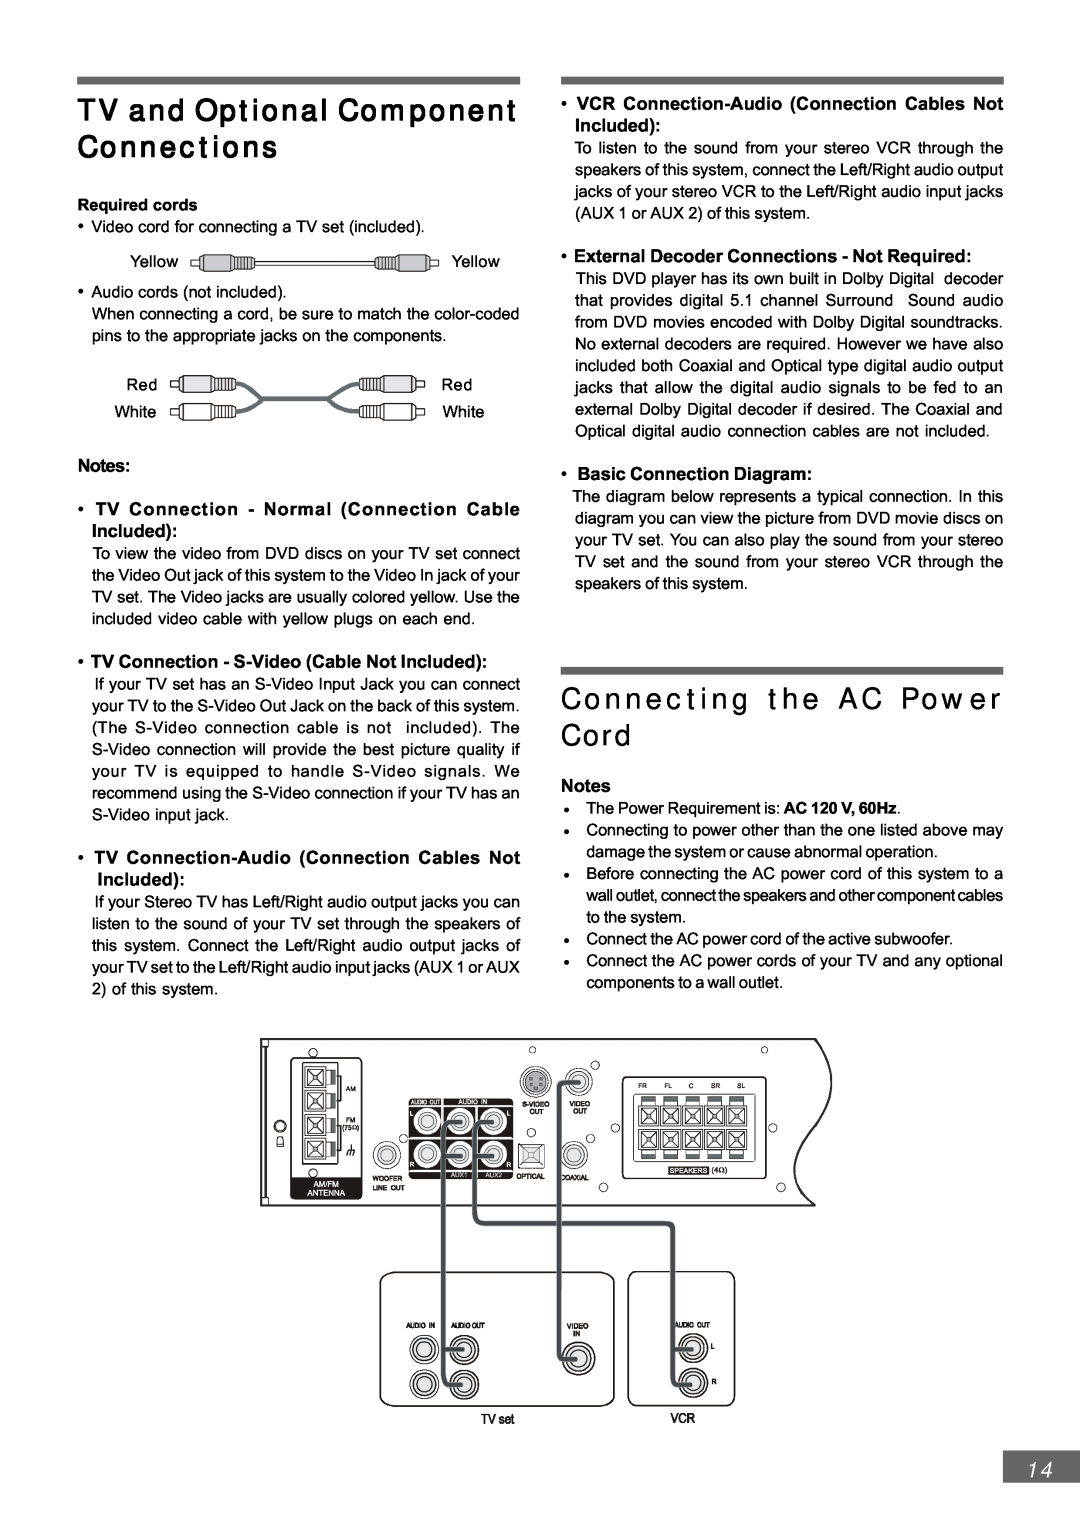 Emerson AV301 owner manual TV and Optional Component Connections, Connecting the AC Power Cord, Basic Connection Diagram 